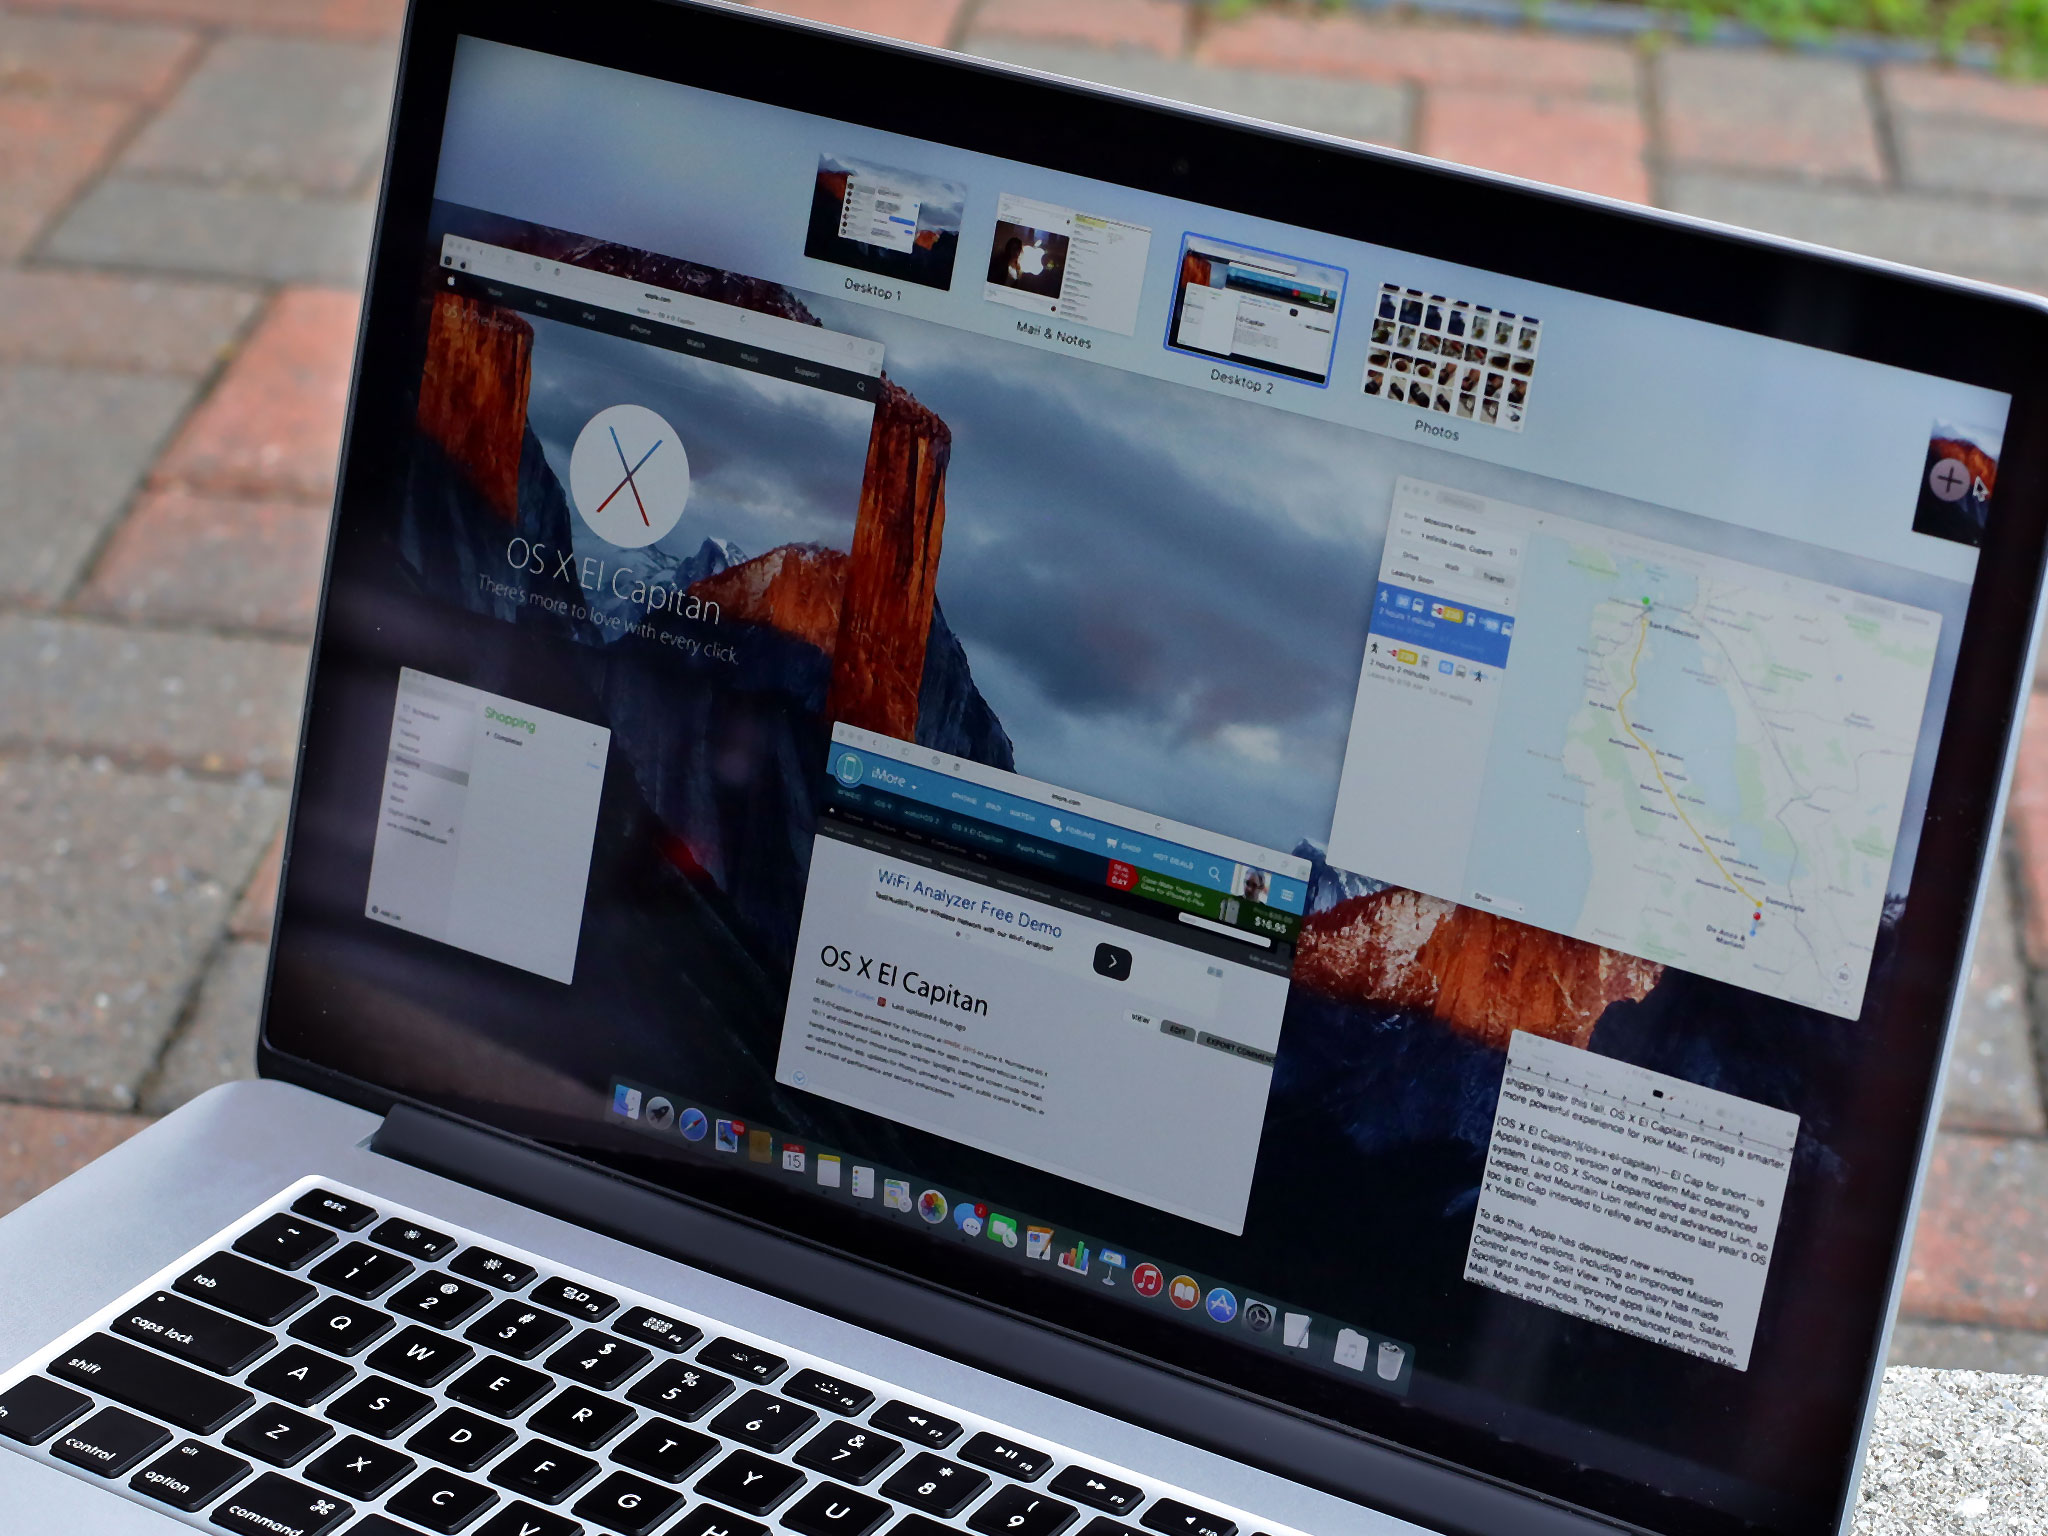 OS X El Capitan first look: A smarter, more polished experience for your Mac